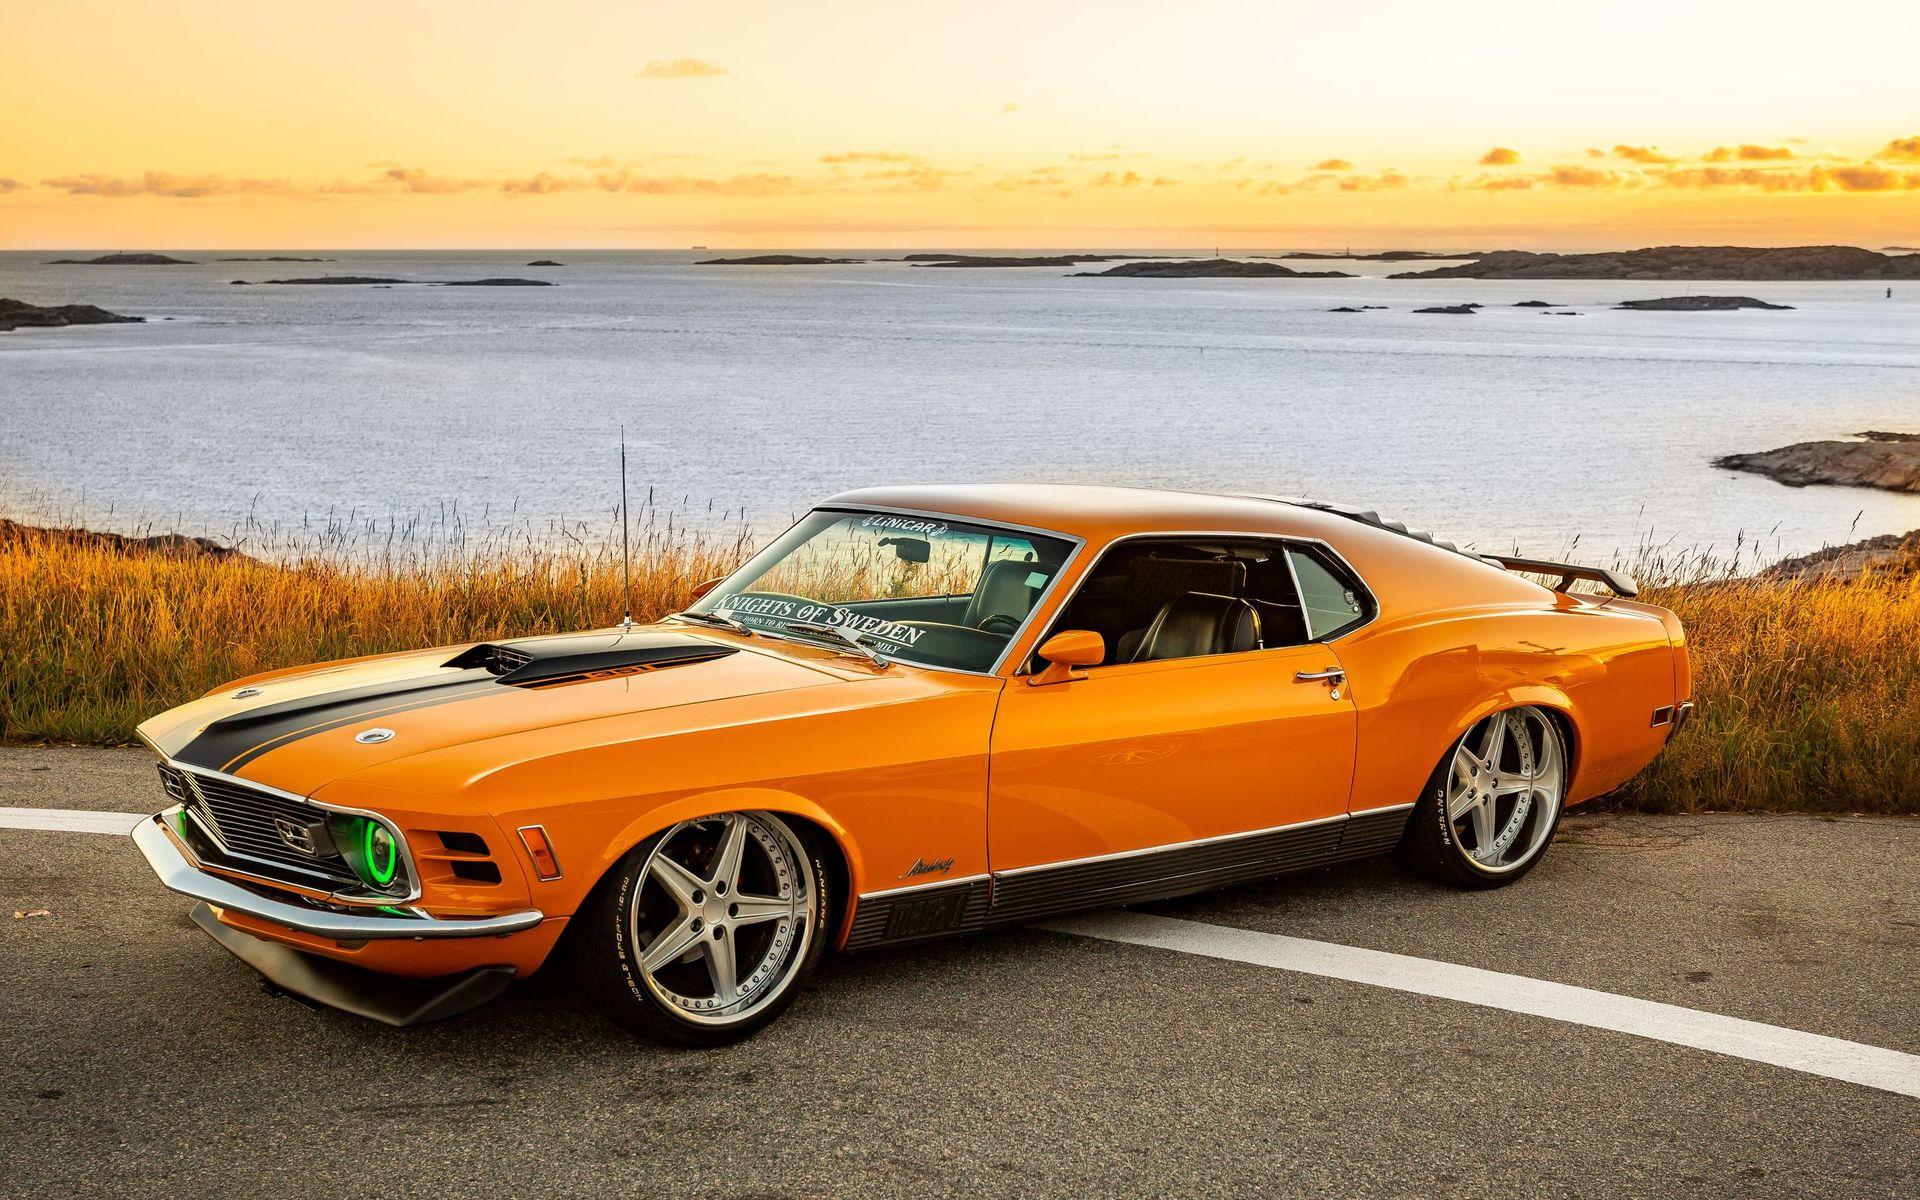 ”Ford Mustang Mach 1 1970”